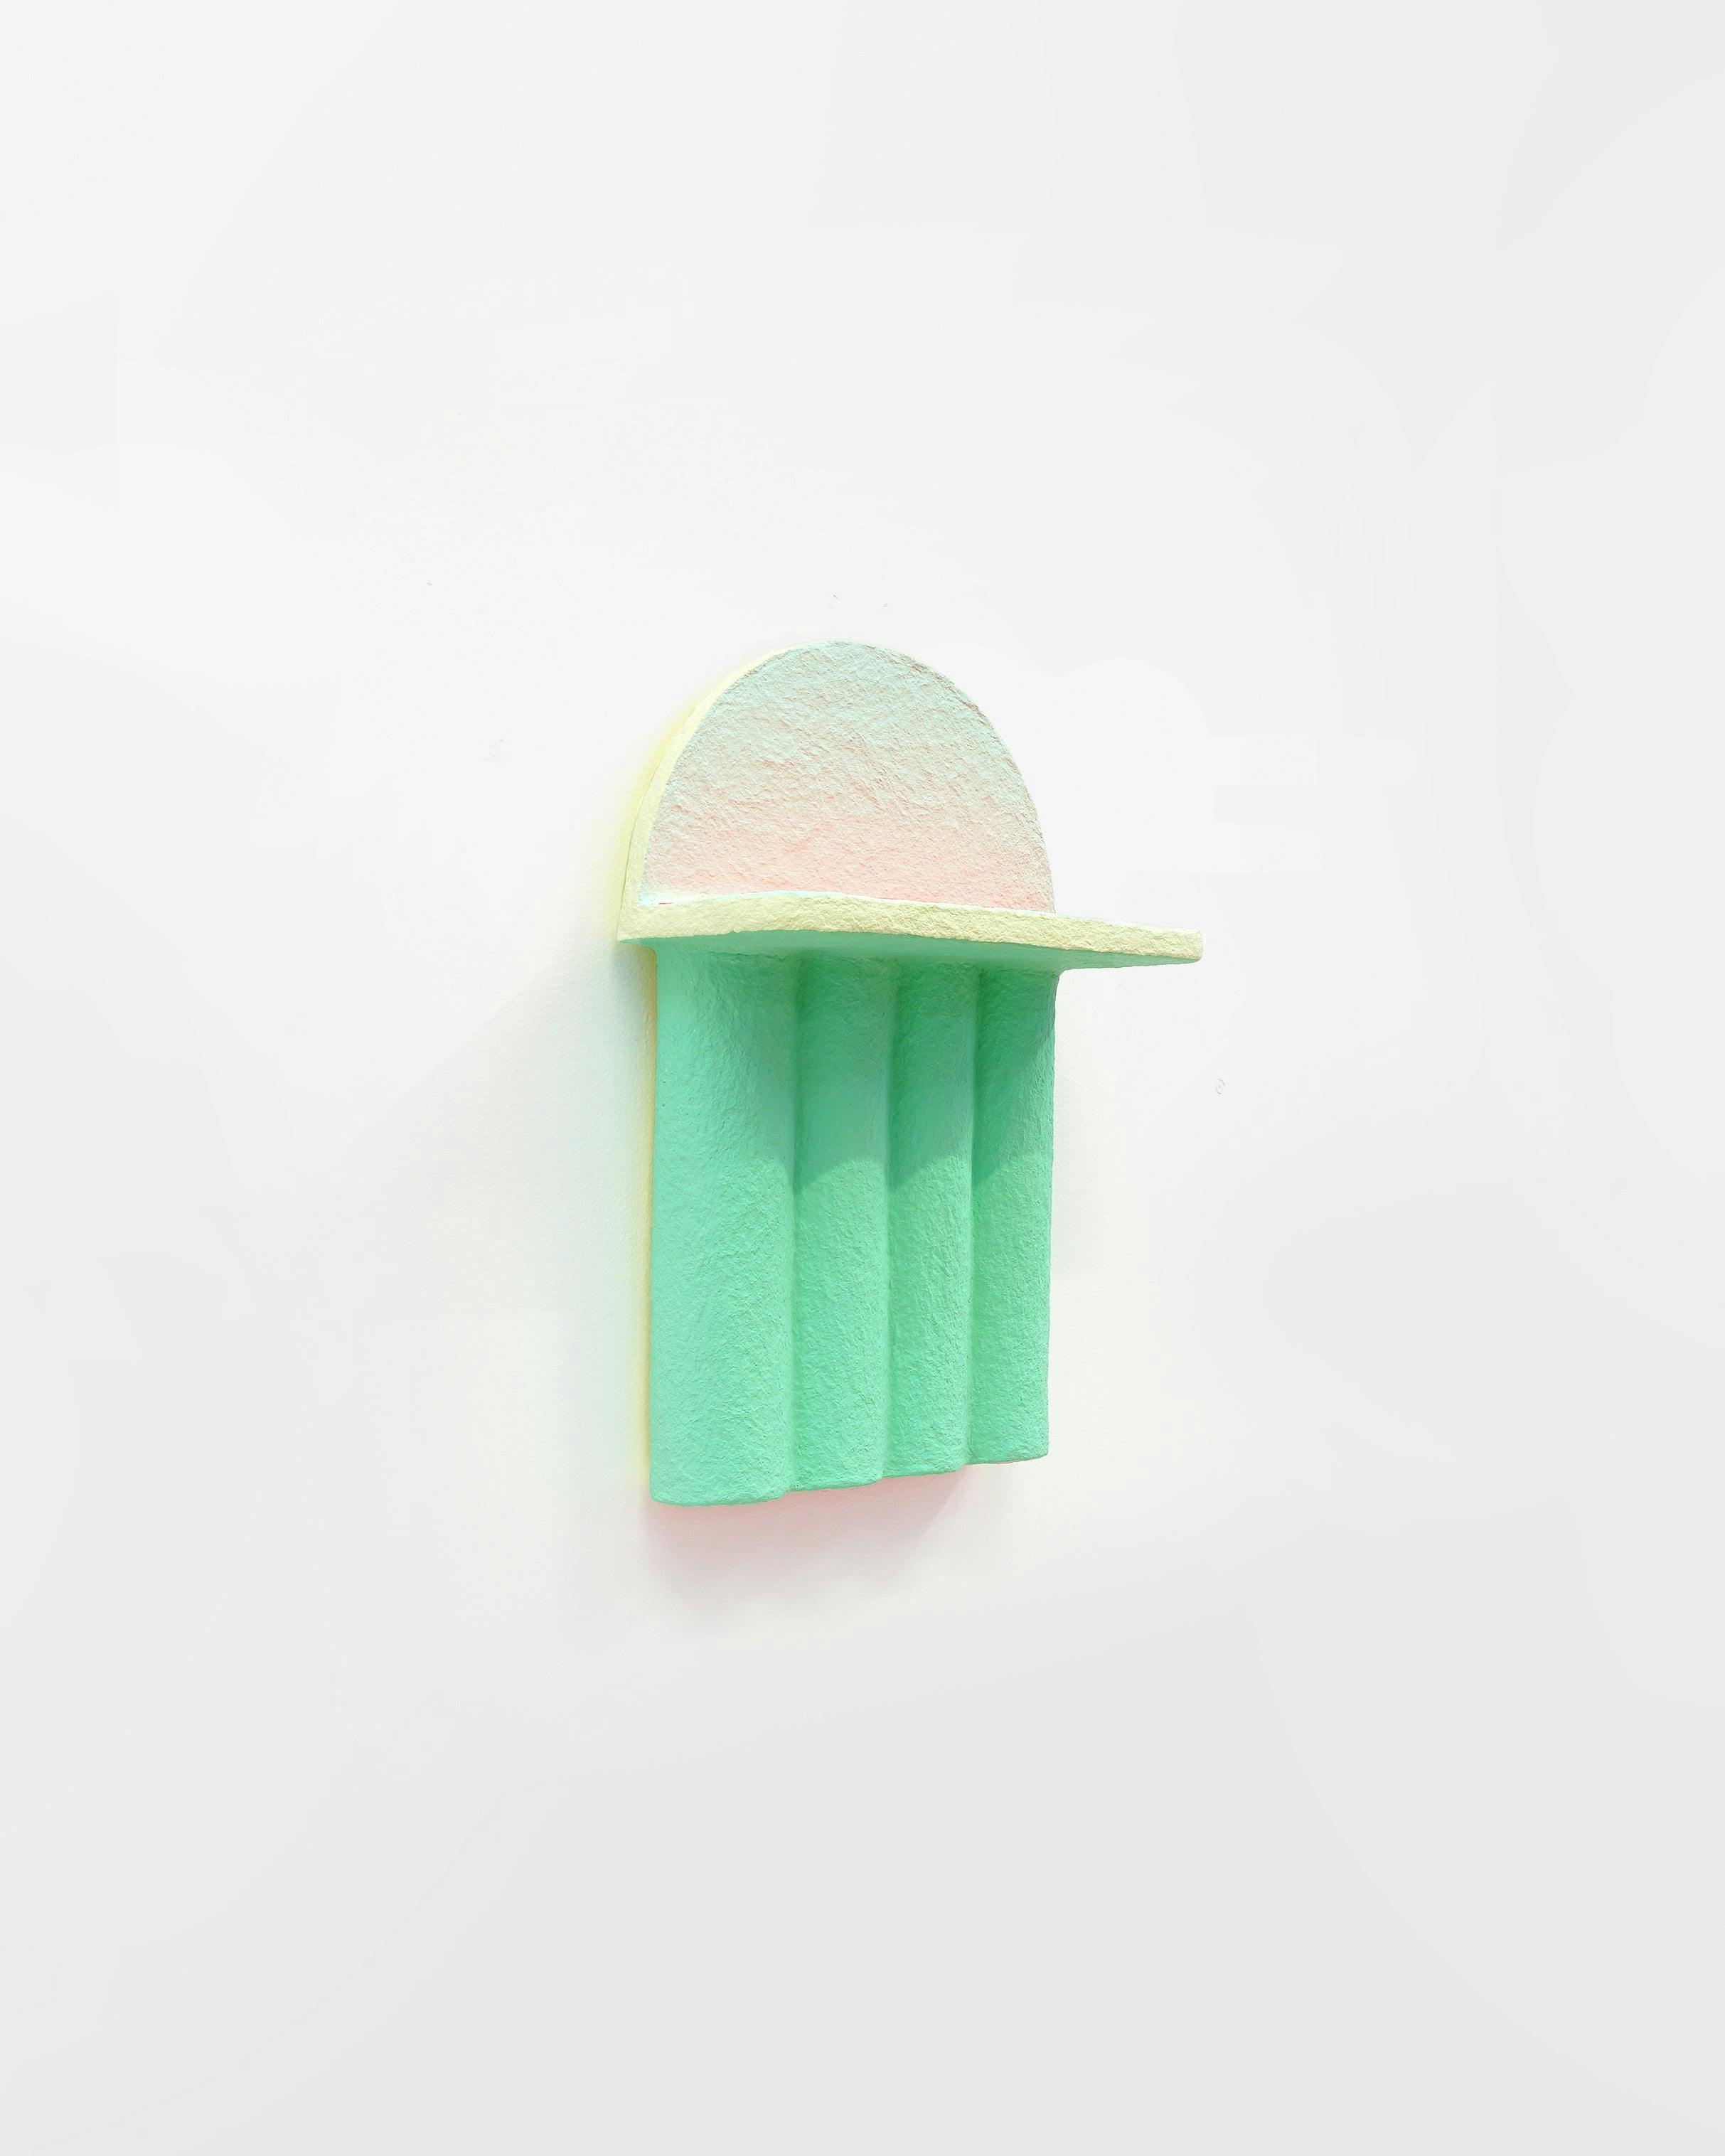 Mixed Media by Adam Frezza & Terri Chiao (CHIAOZZA) titled "Shrine to Nothingness (Pale Mint, Mint Green, Luminous Red)".